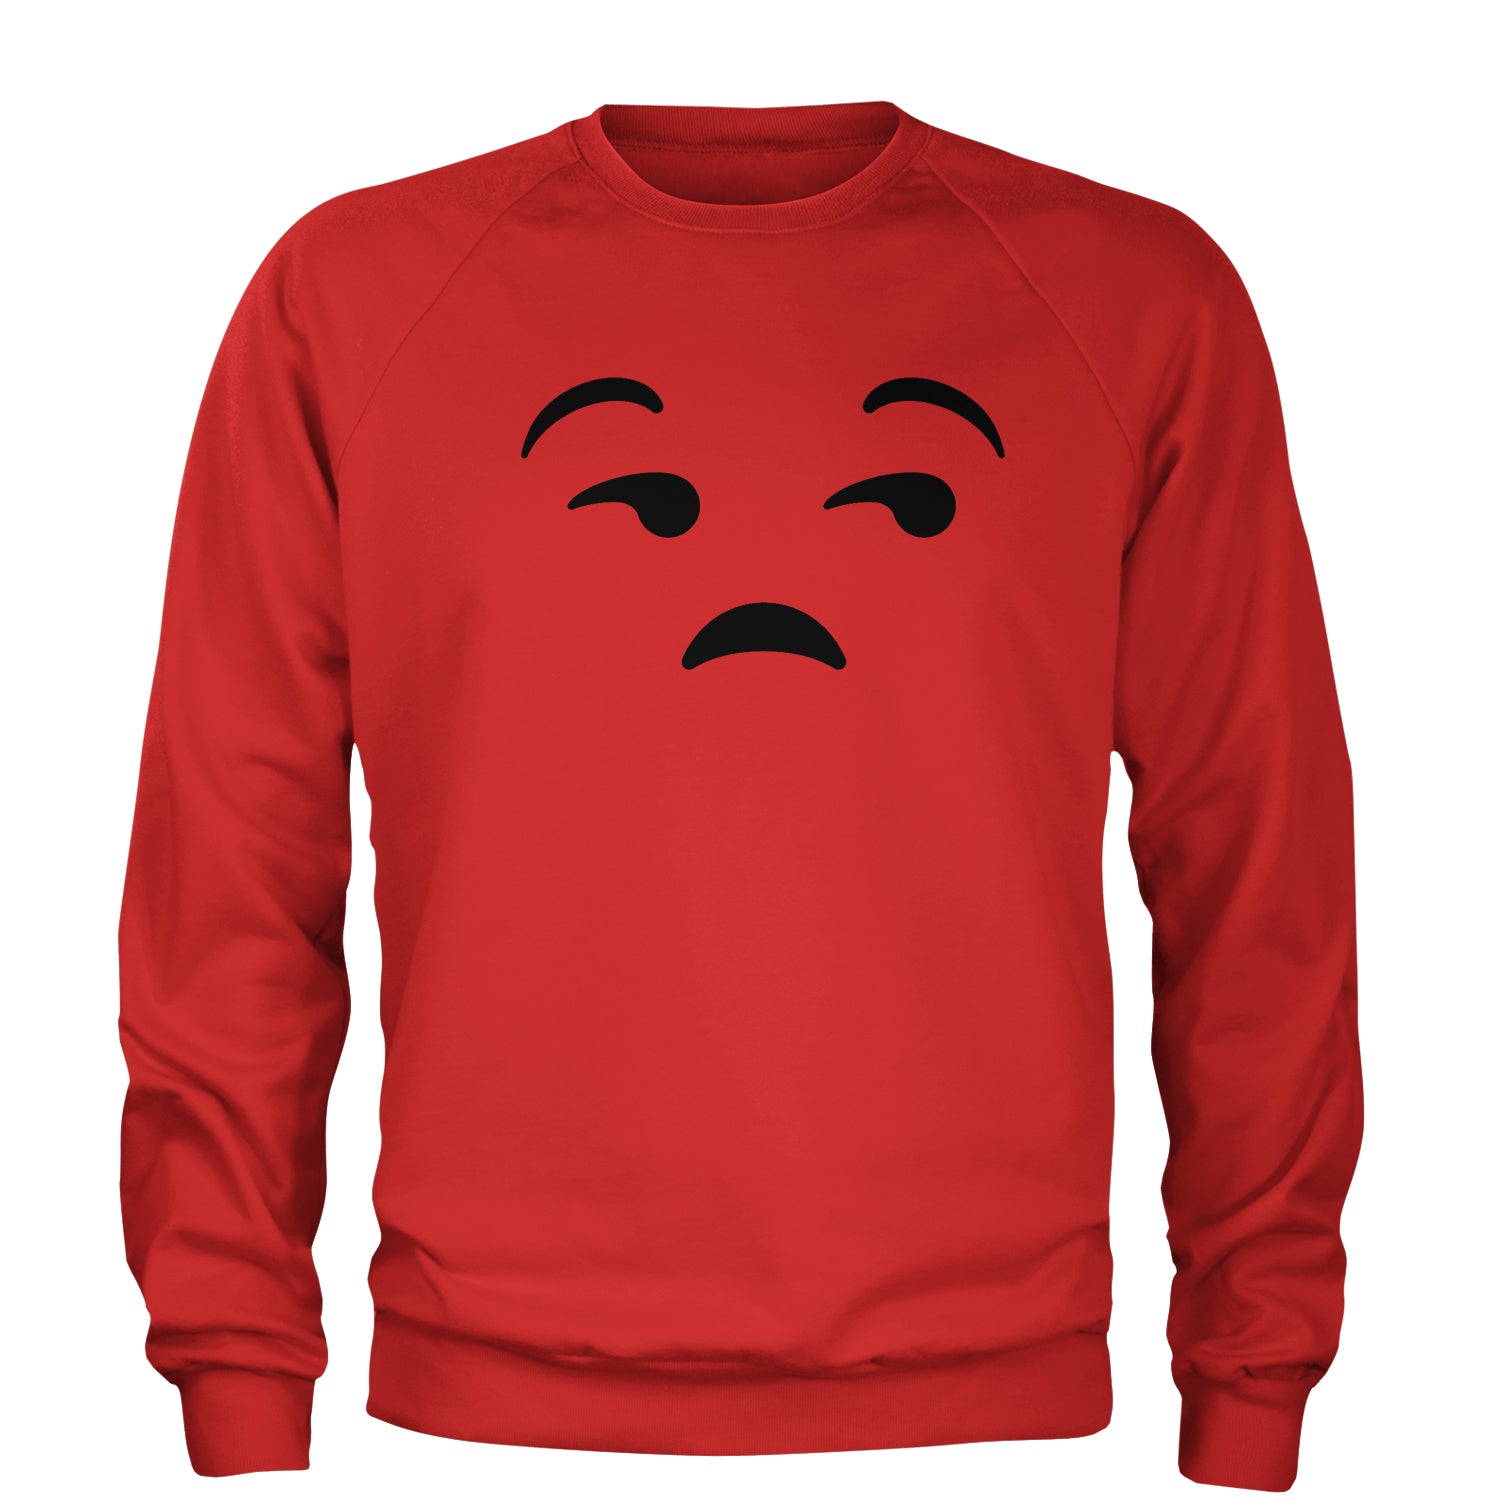 Emoticon Whatever Smile Face Adult Crewneck Sweatshirt cosplay, costume, dress, emoji, emote, face, halloween, smiley, up, yellow by Expression Tees